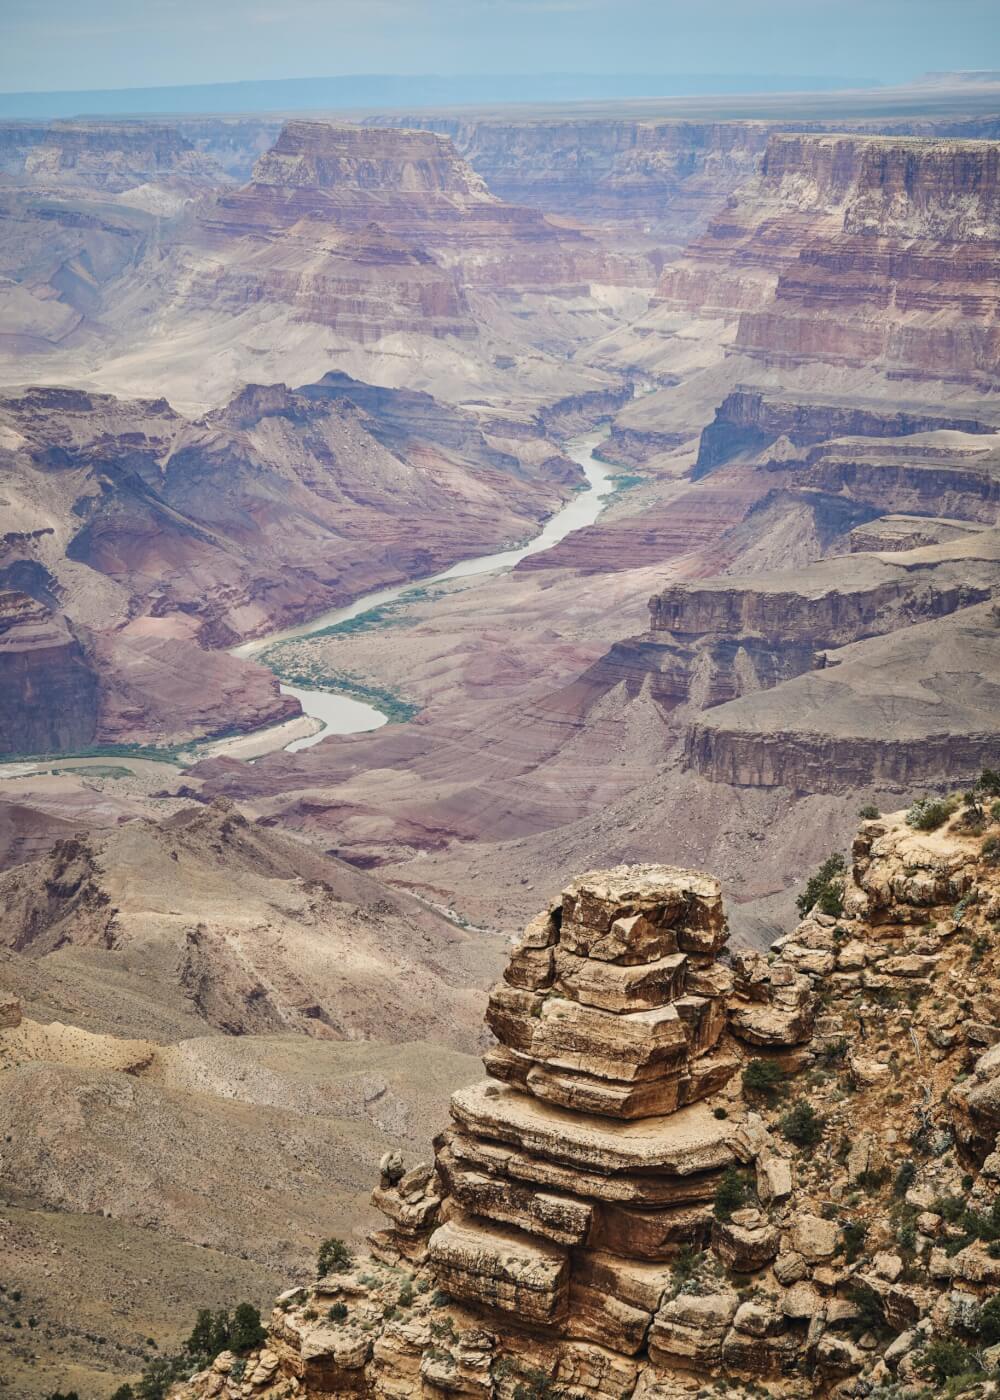 A view of a river cutting through the grand canyon at midday, providing the full scope of the hazardous terrain mules have to traverse. 